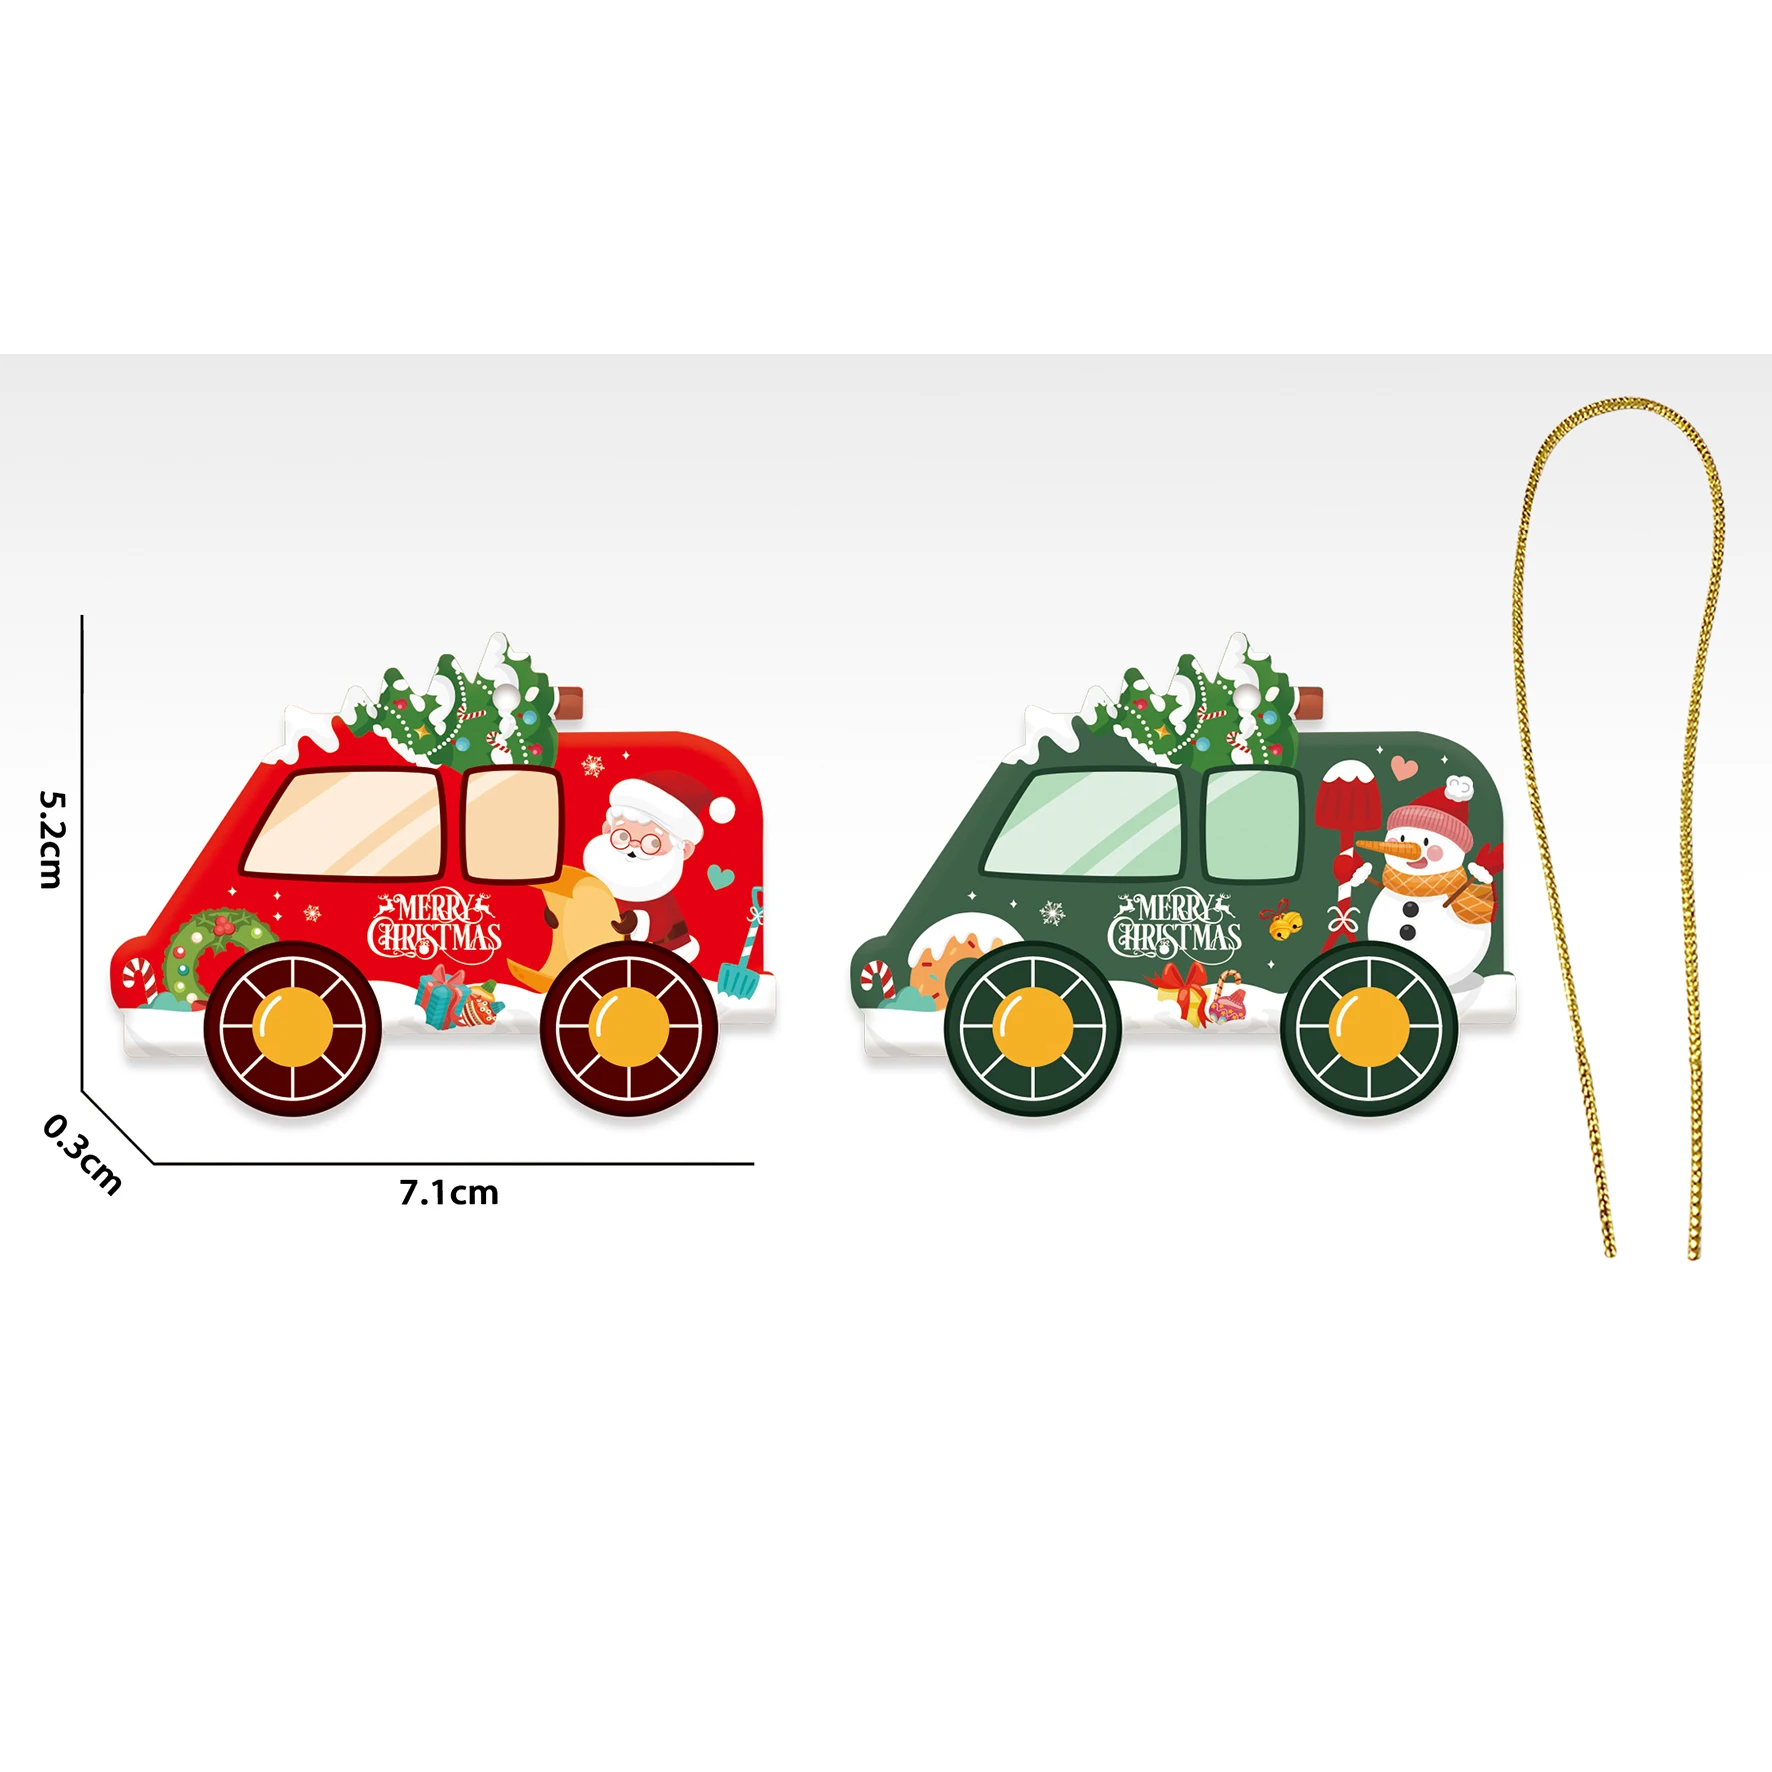 2022 New items  christmas decoration supplies  kids promotion gifts toys from aged 3 years up